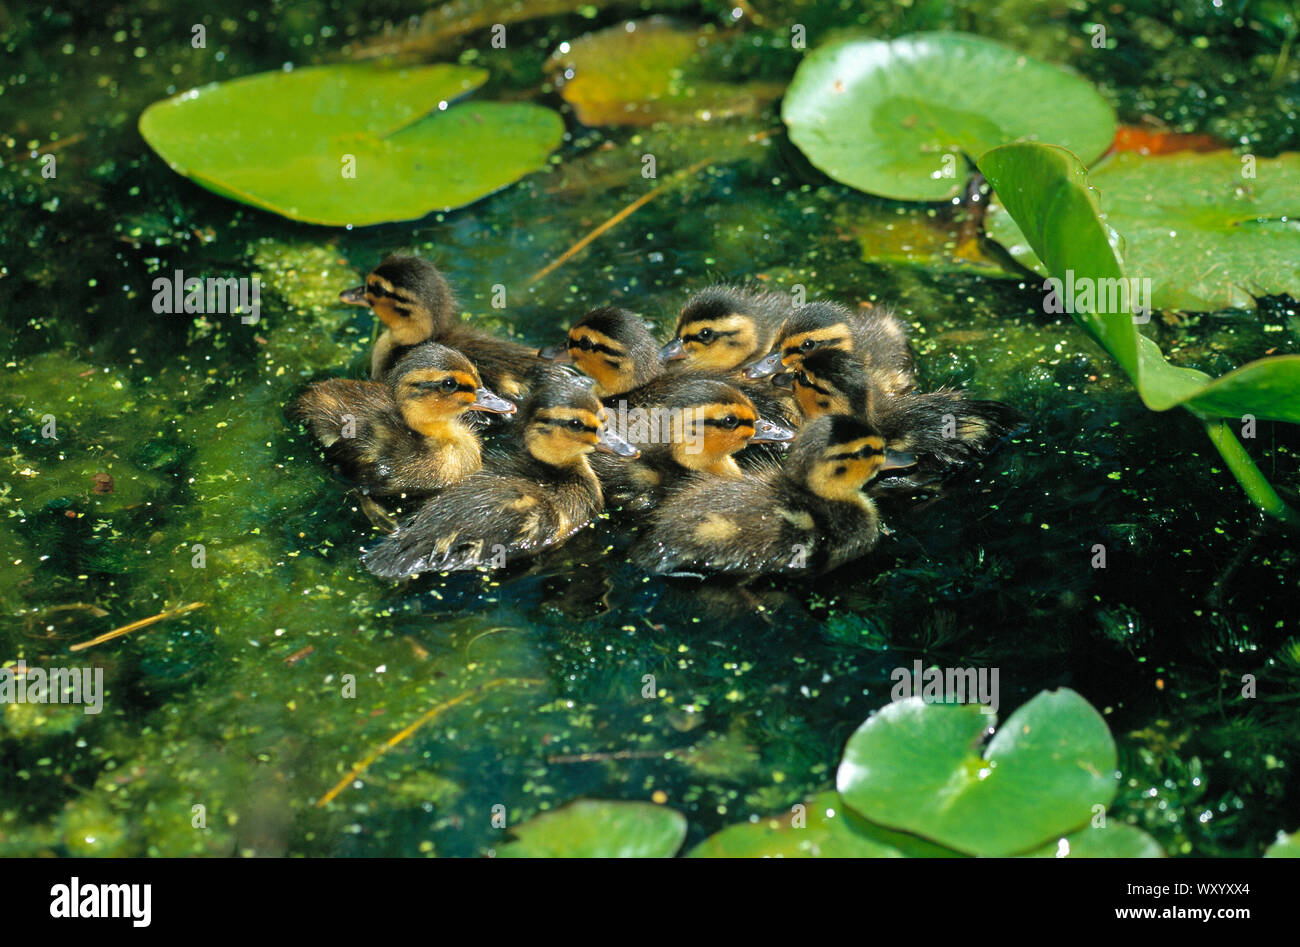 MALLARD ducklings.( Anas platyrhynchos).  Just hatched and swimming on the surface of a pond amongst floating waterlily leaves. Group of nine. Stock Photo